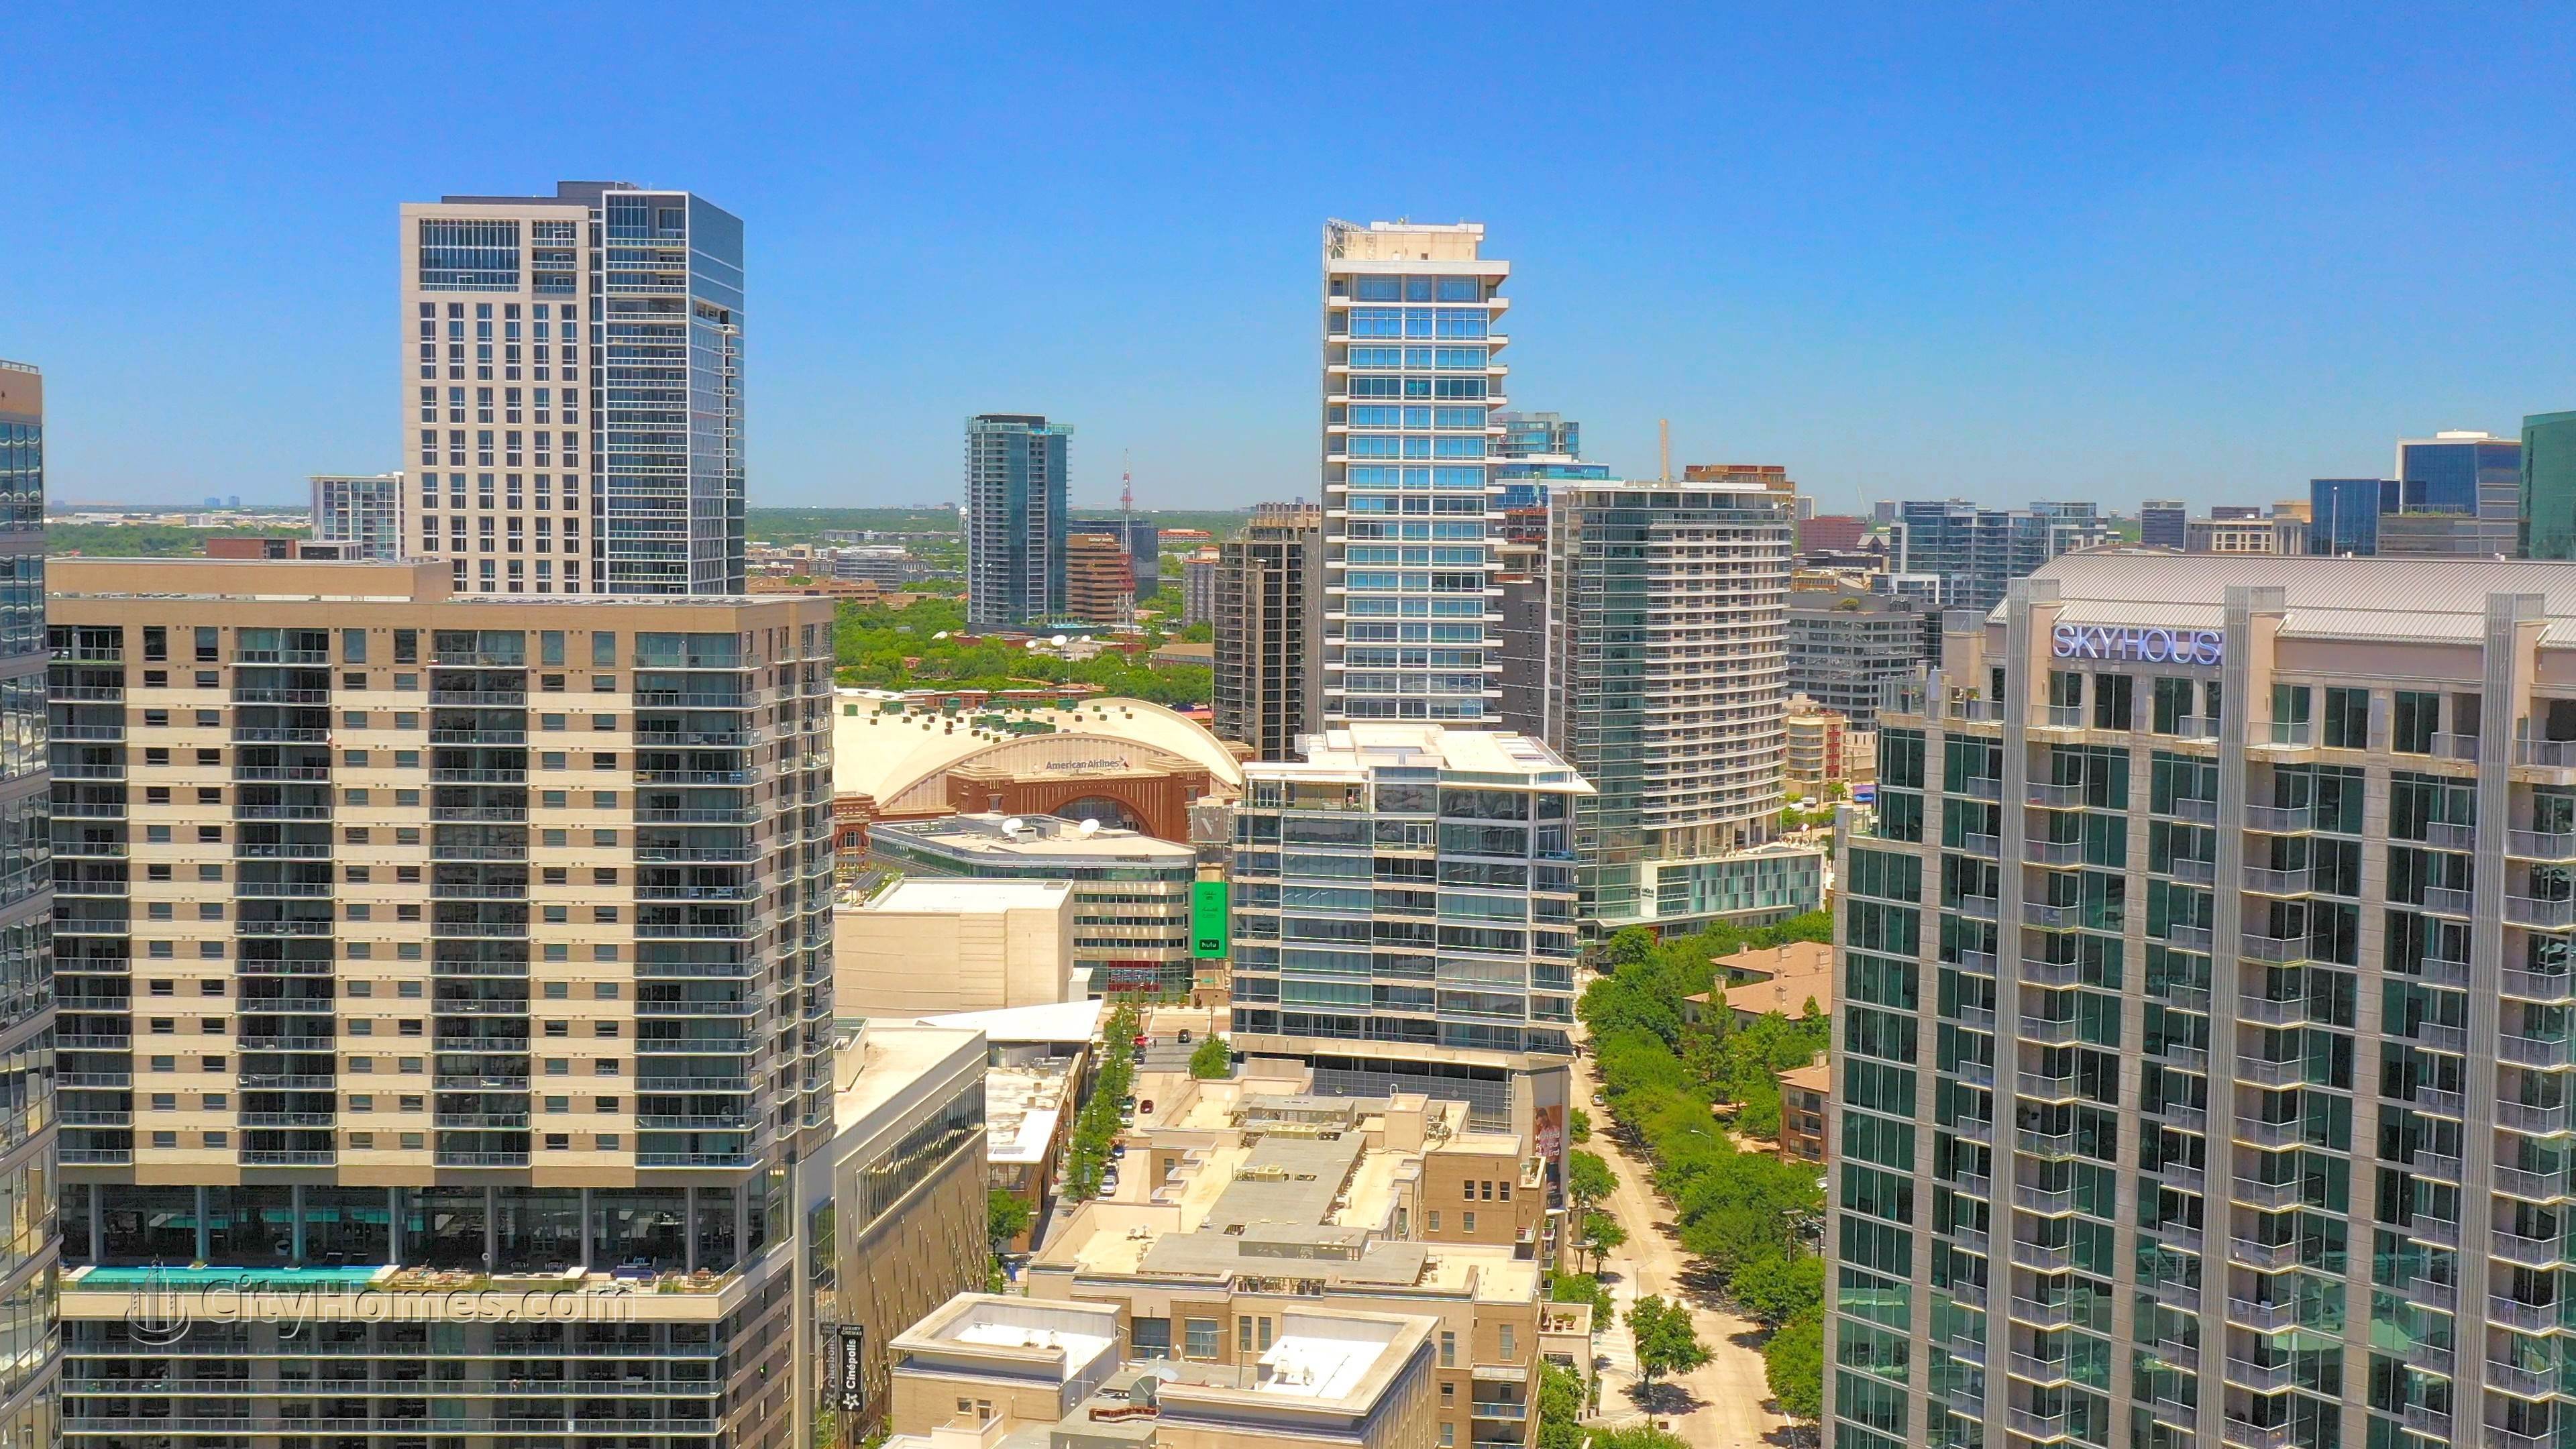 4. Stoneleigh Residences building at 2300 Wolf Street, Uptown Dallas, Dallas, TX 75201